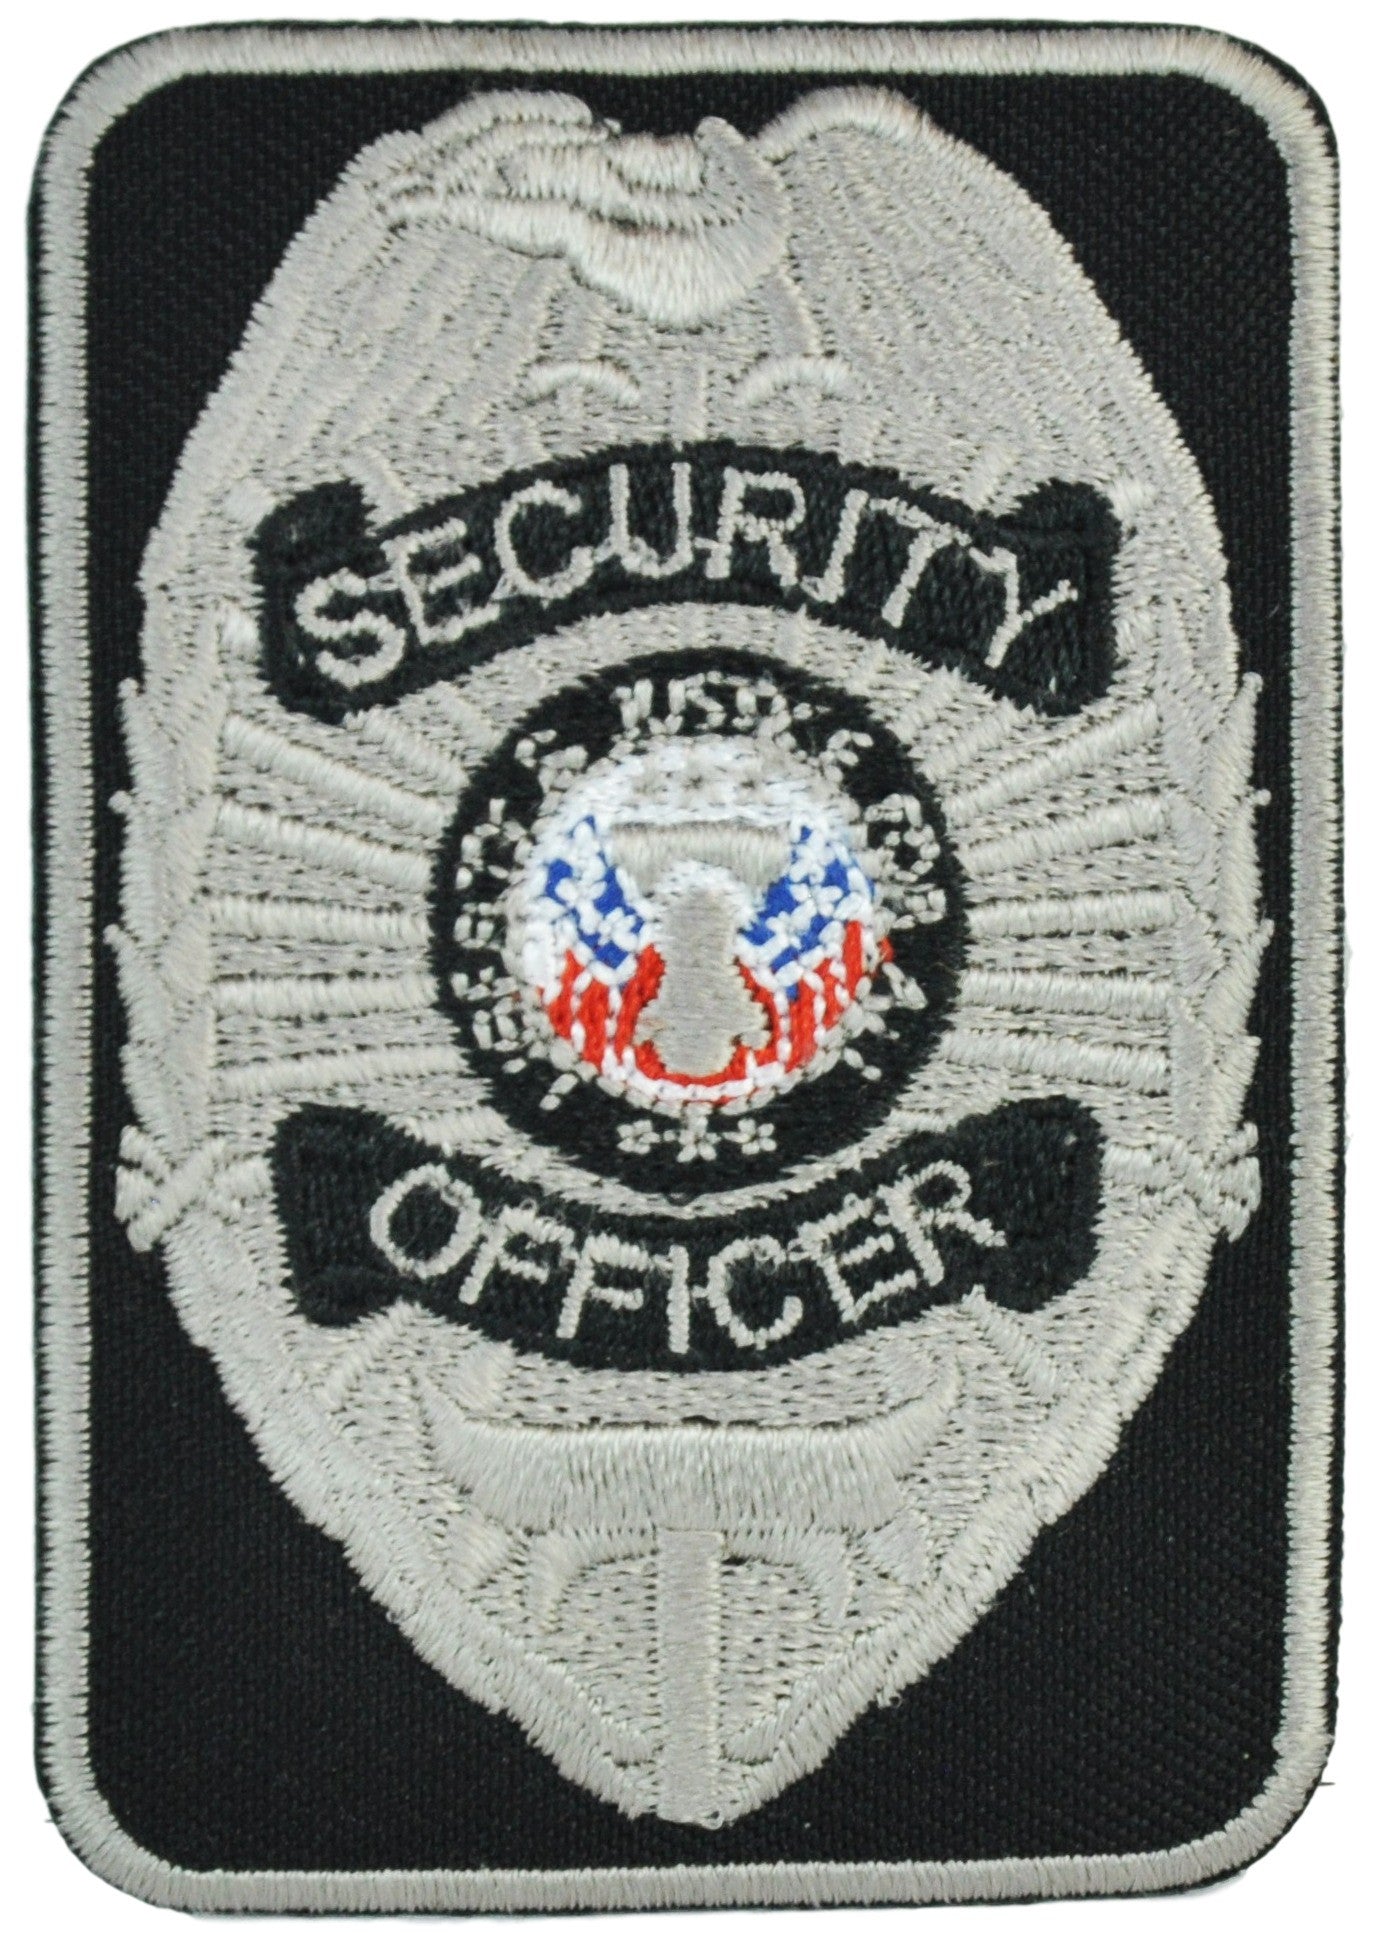 Tactical 365 Operation First Response 11 x 4 Police Back Patches